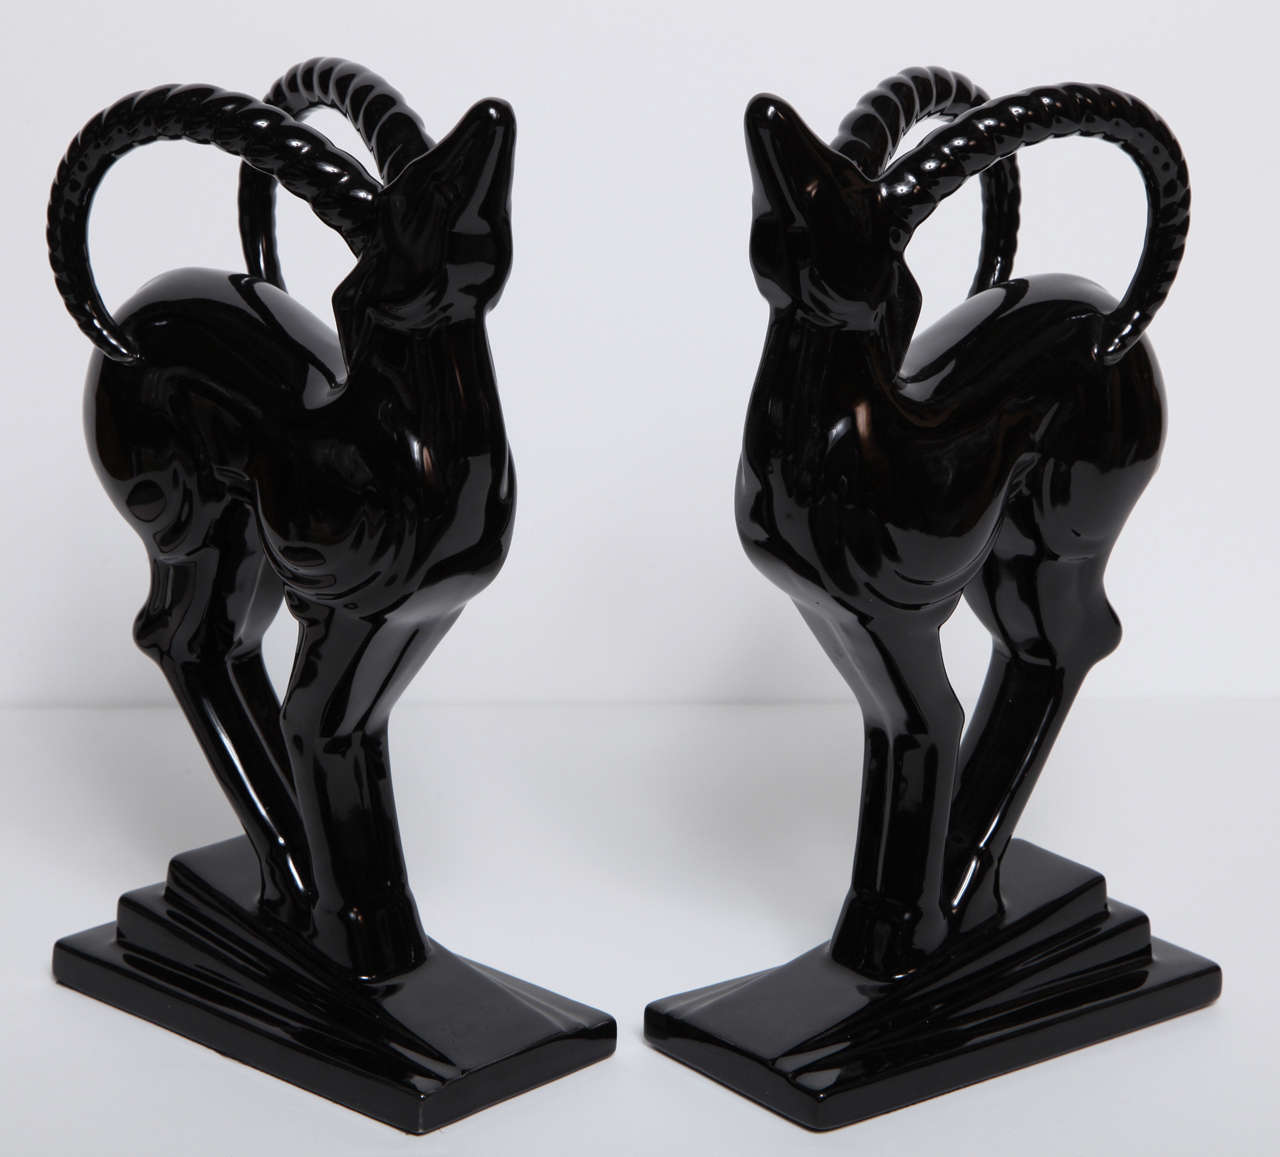 A lovely pair of Art Deco ceramic bookends in a high gloss finish.